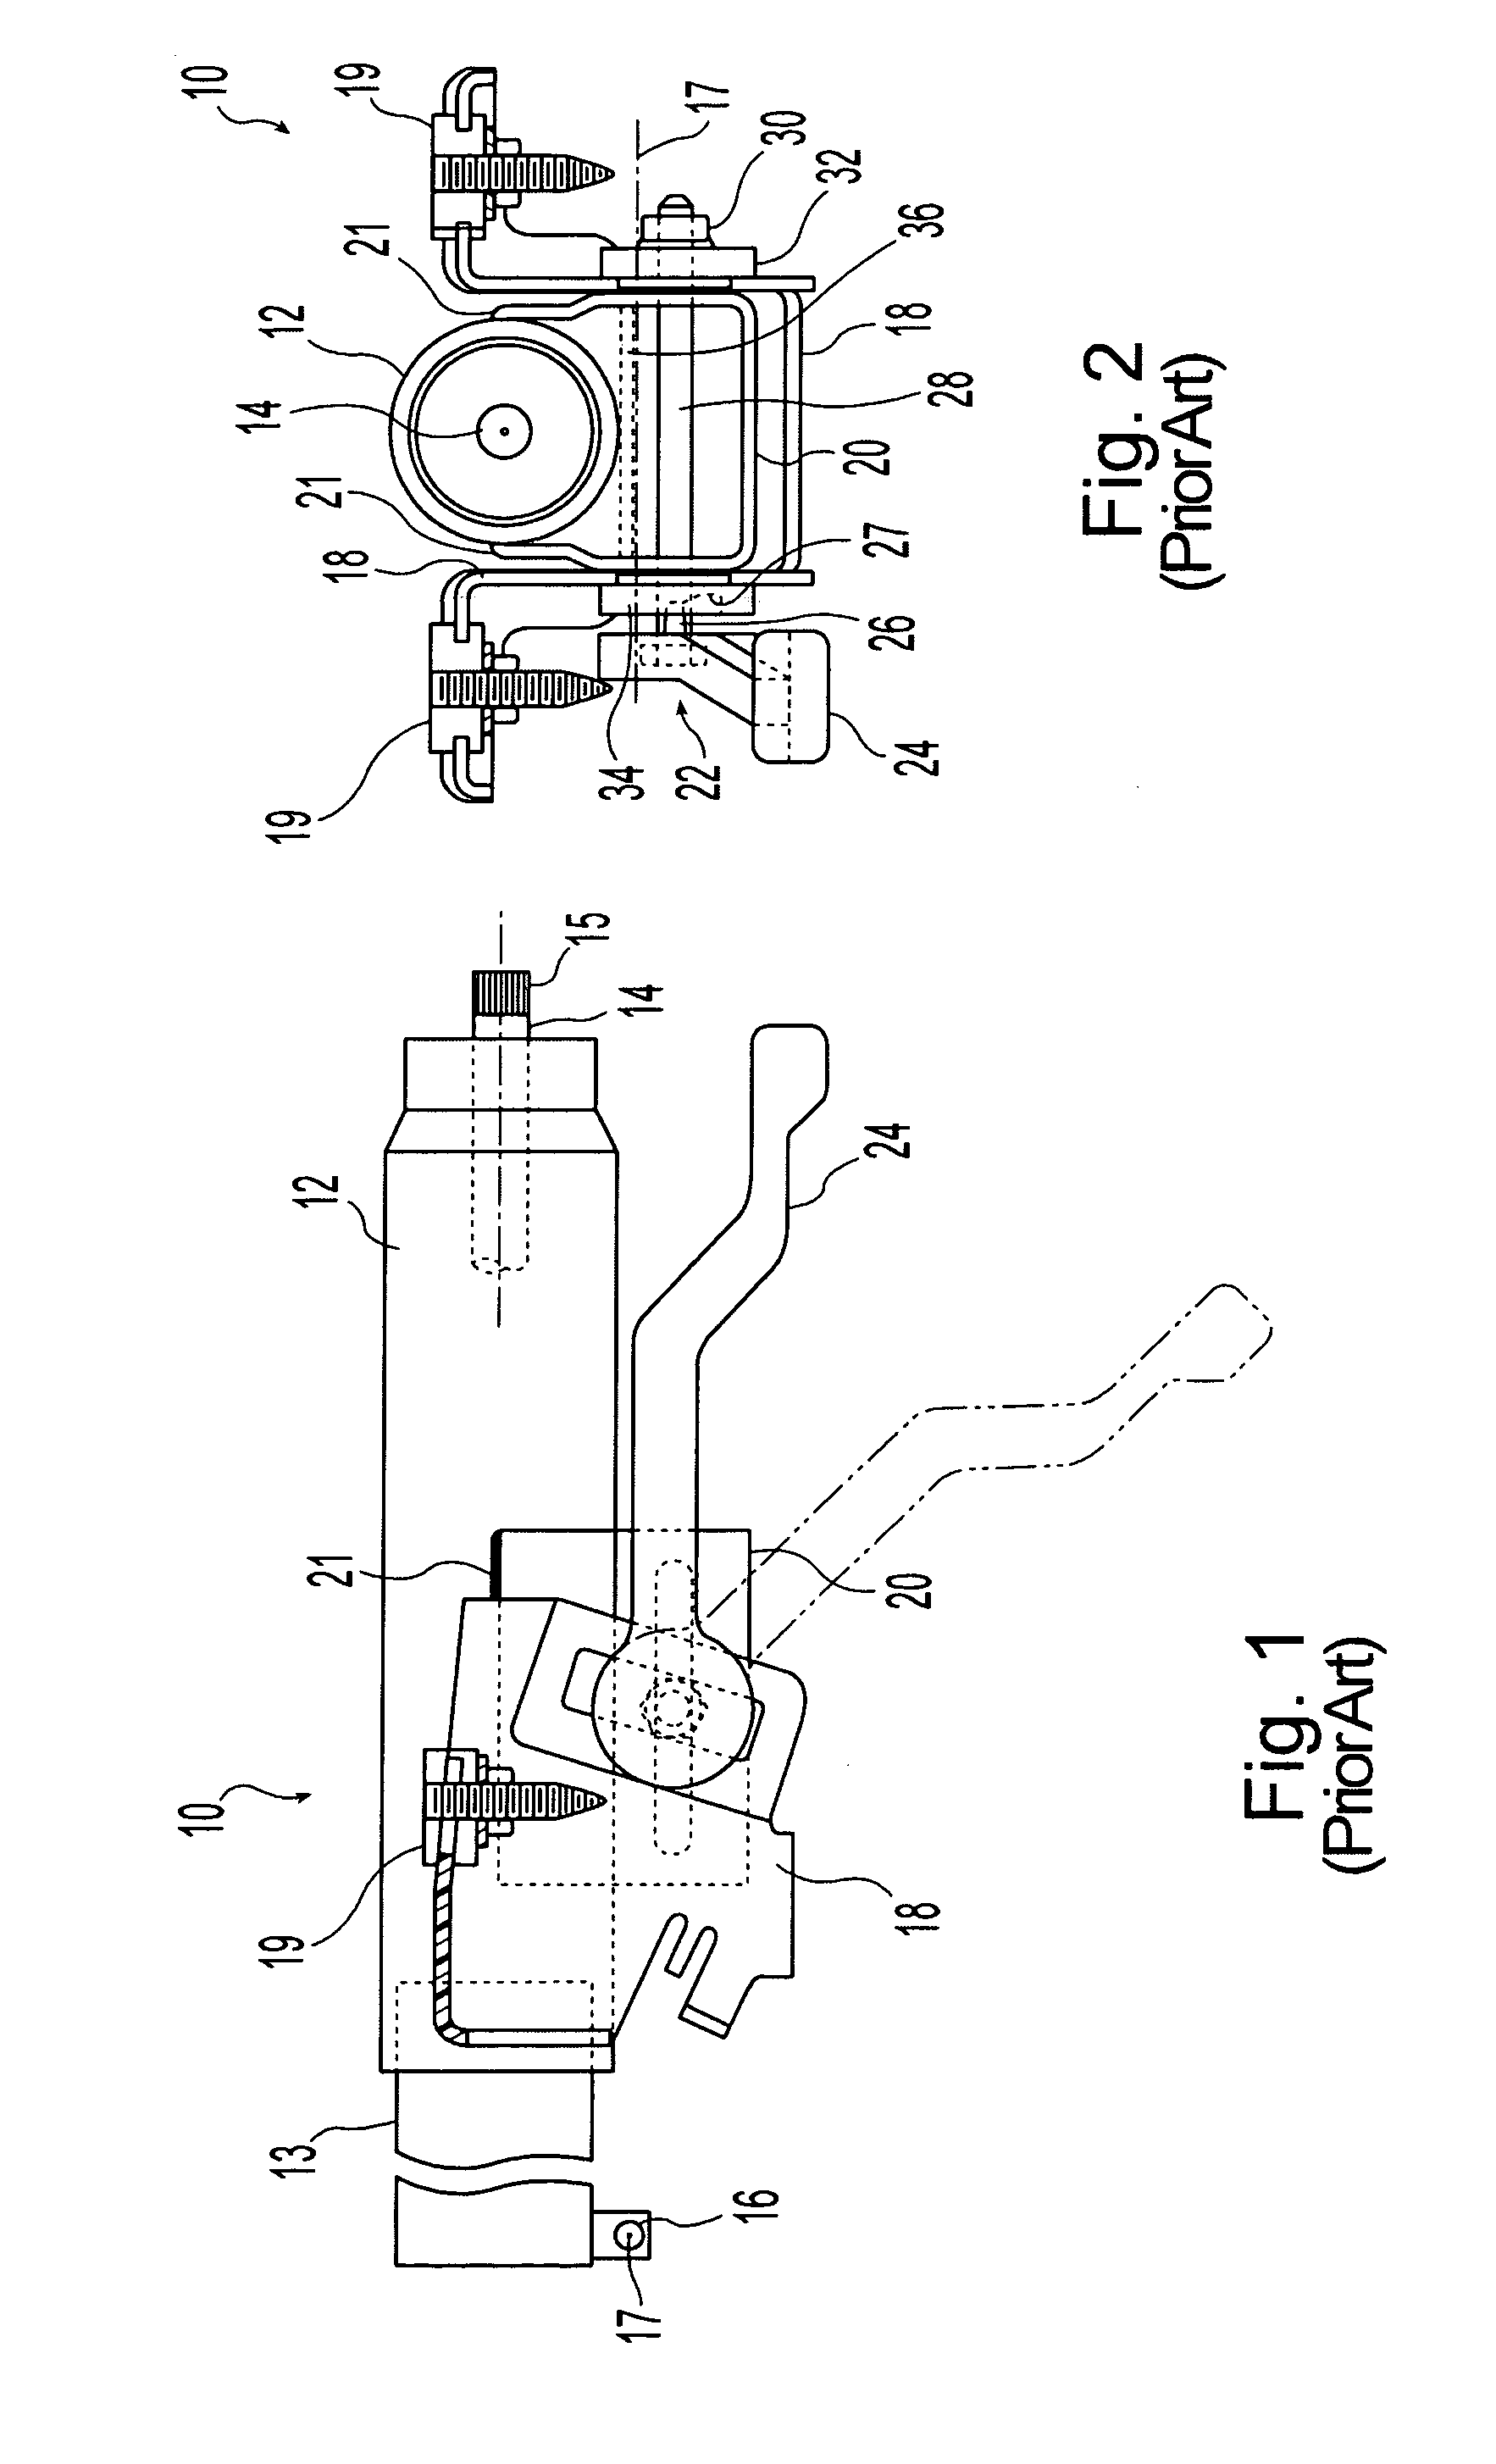 Adjustable steering column assembly with compressive locking mechanism